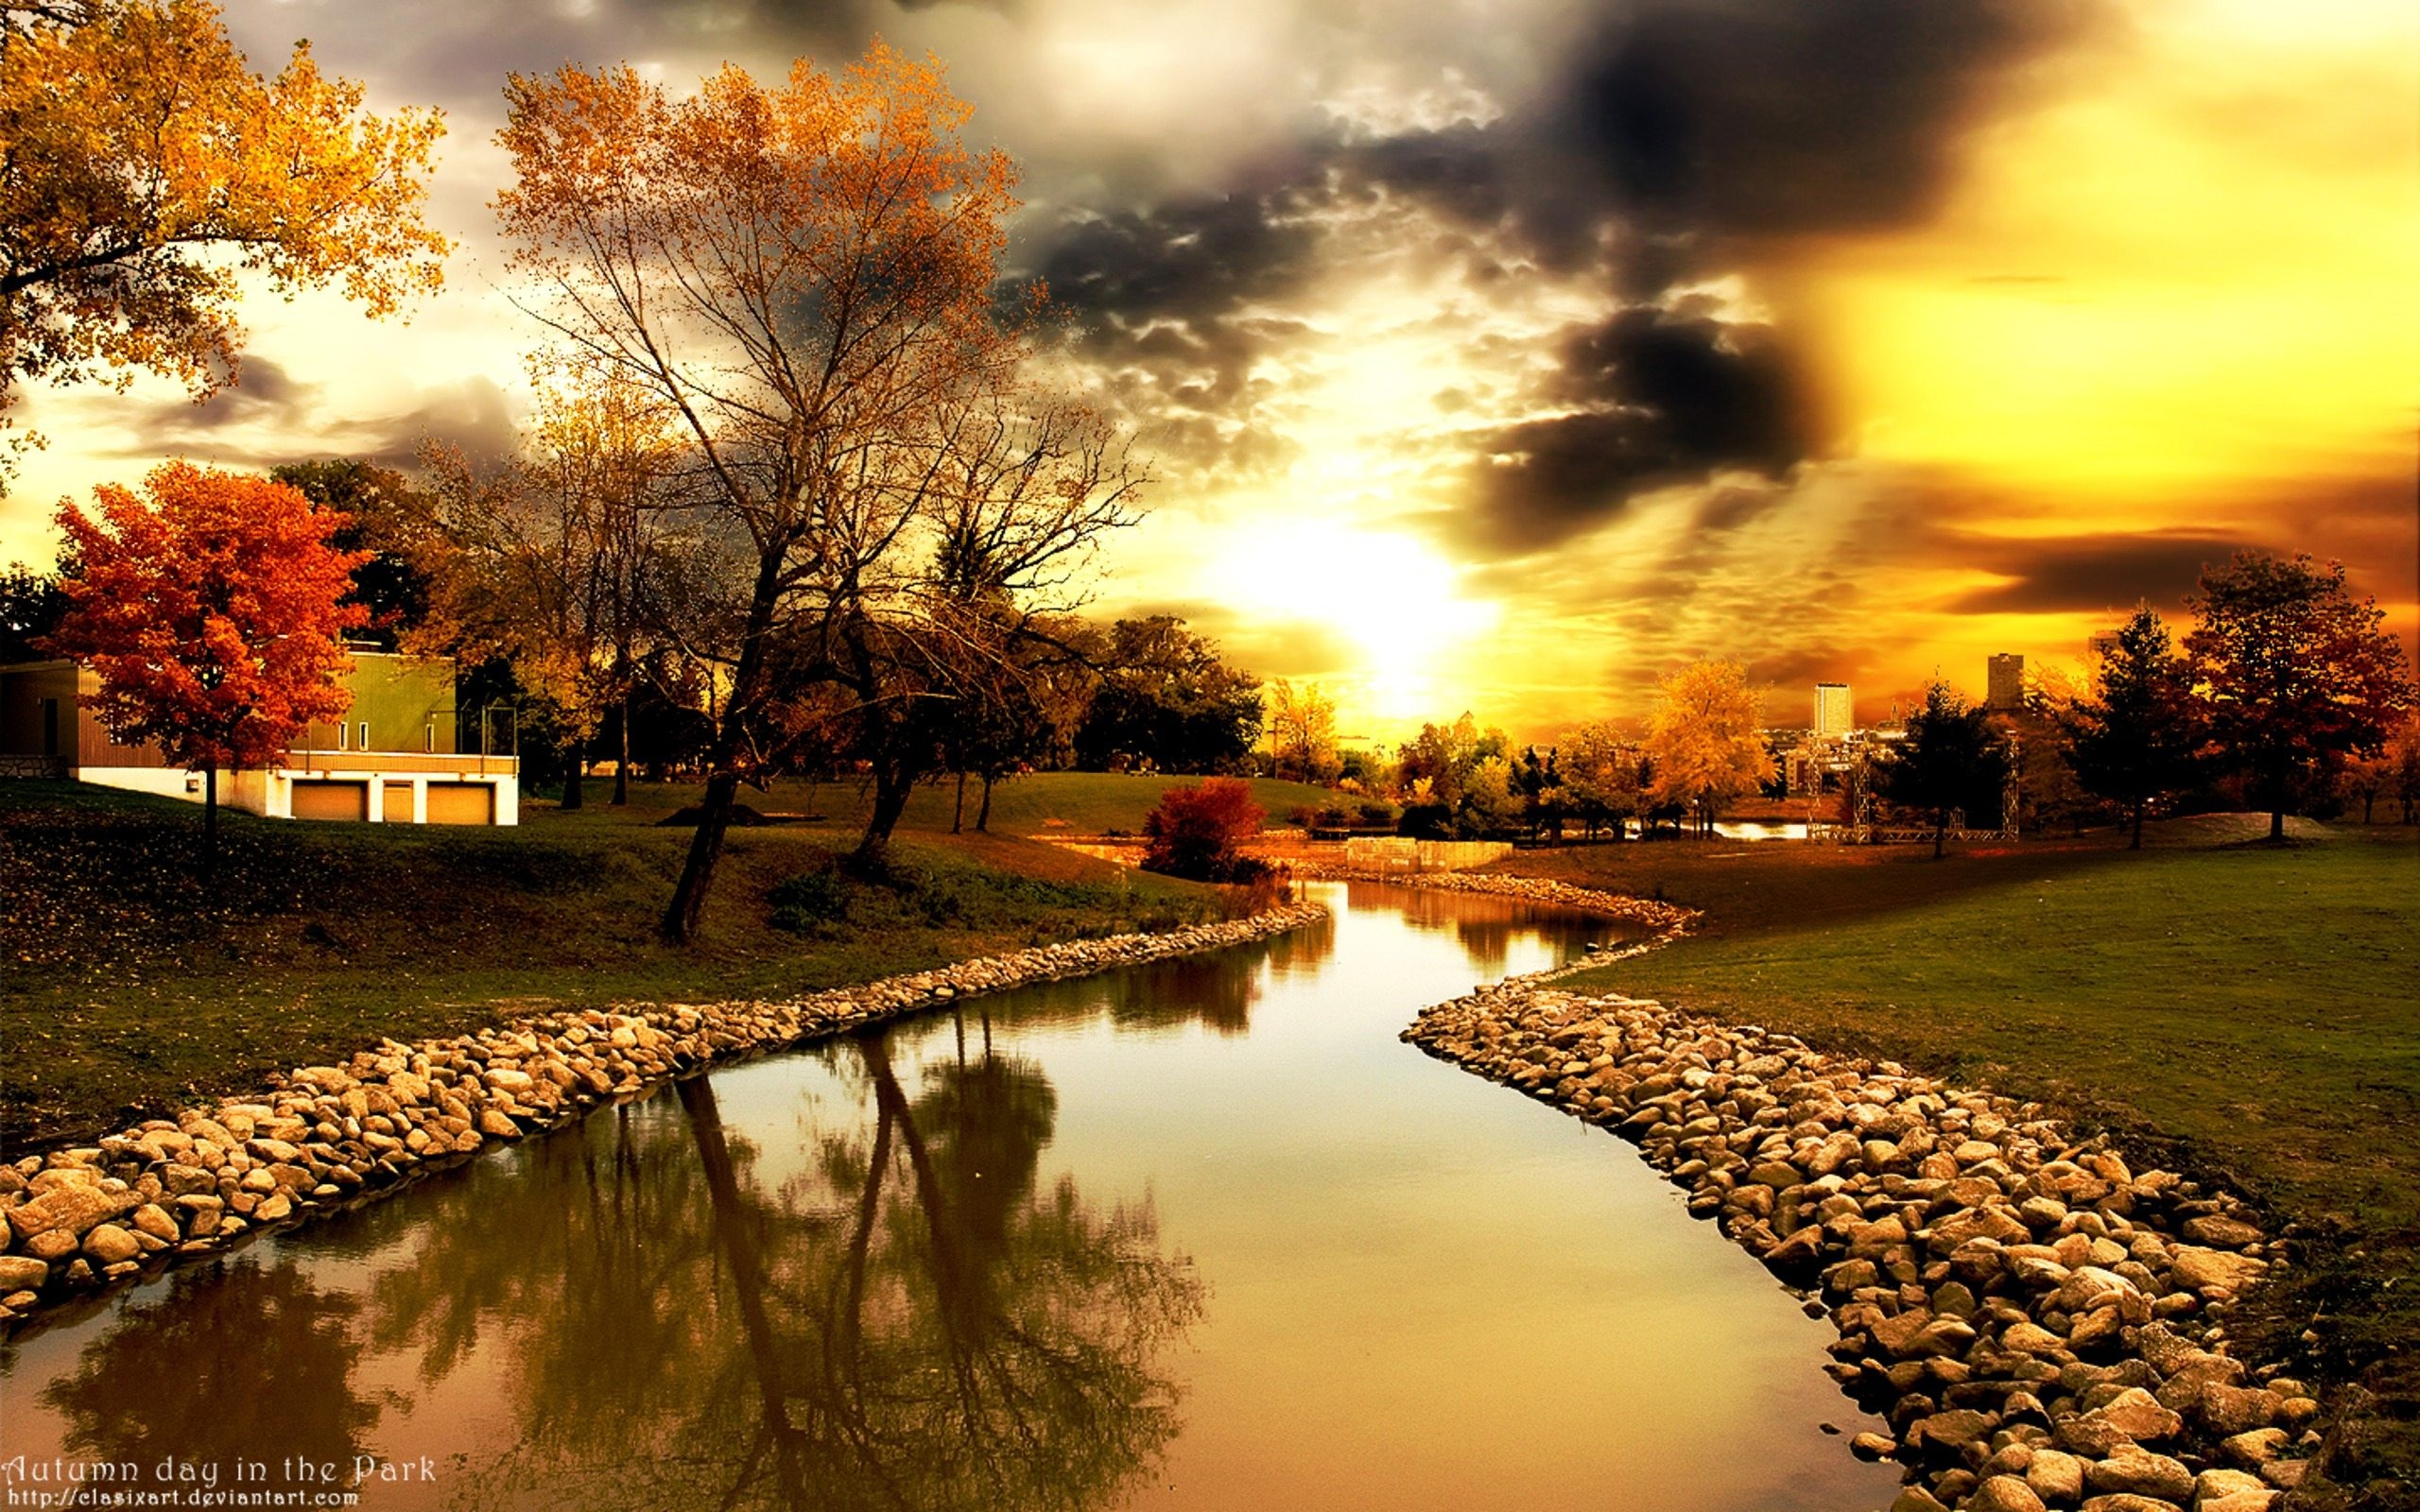 sunset, Clouds, Landscapes, Nature, Trees, Autumn, Day, Rocks, Sunlight, Skyscapes Wallpaper